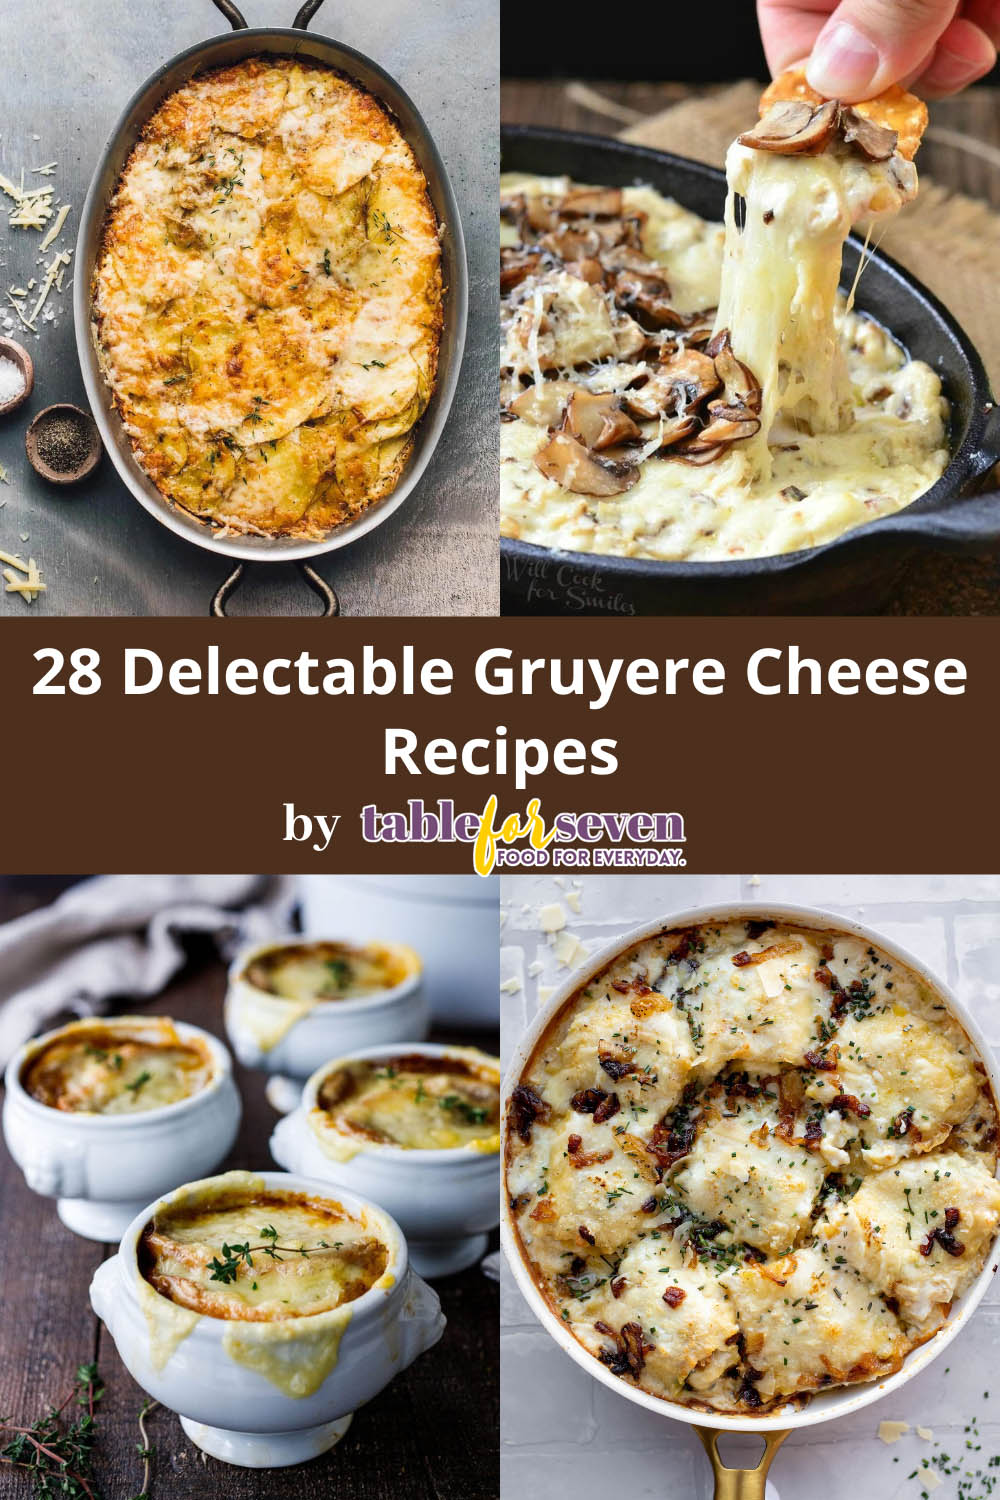 28 Delectable Gruyere Cheese Recipes